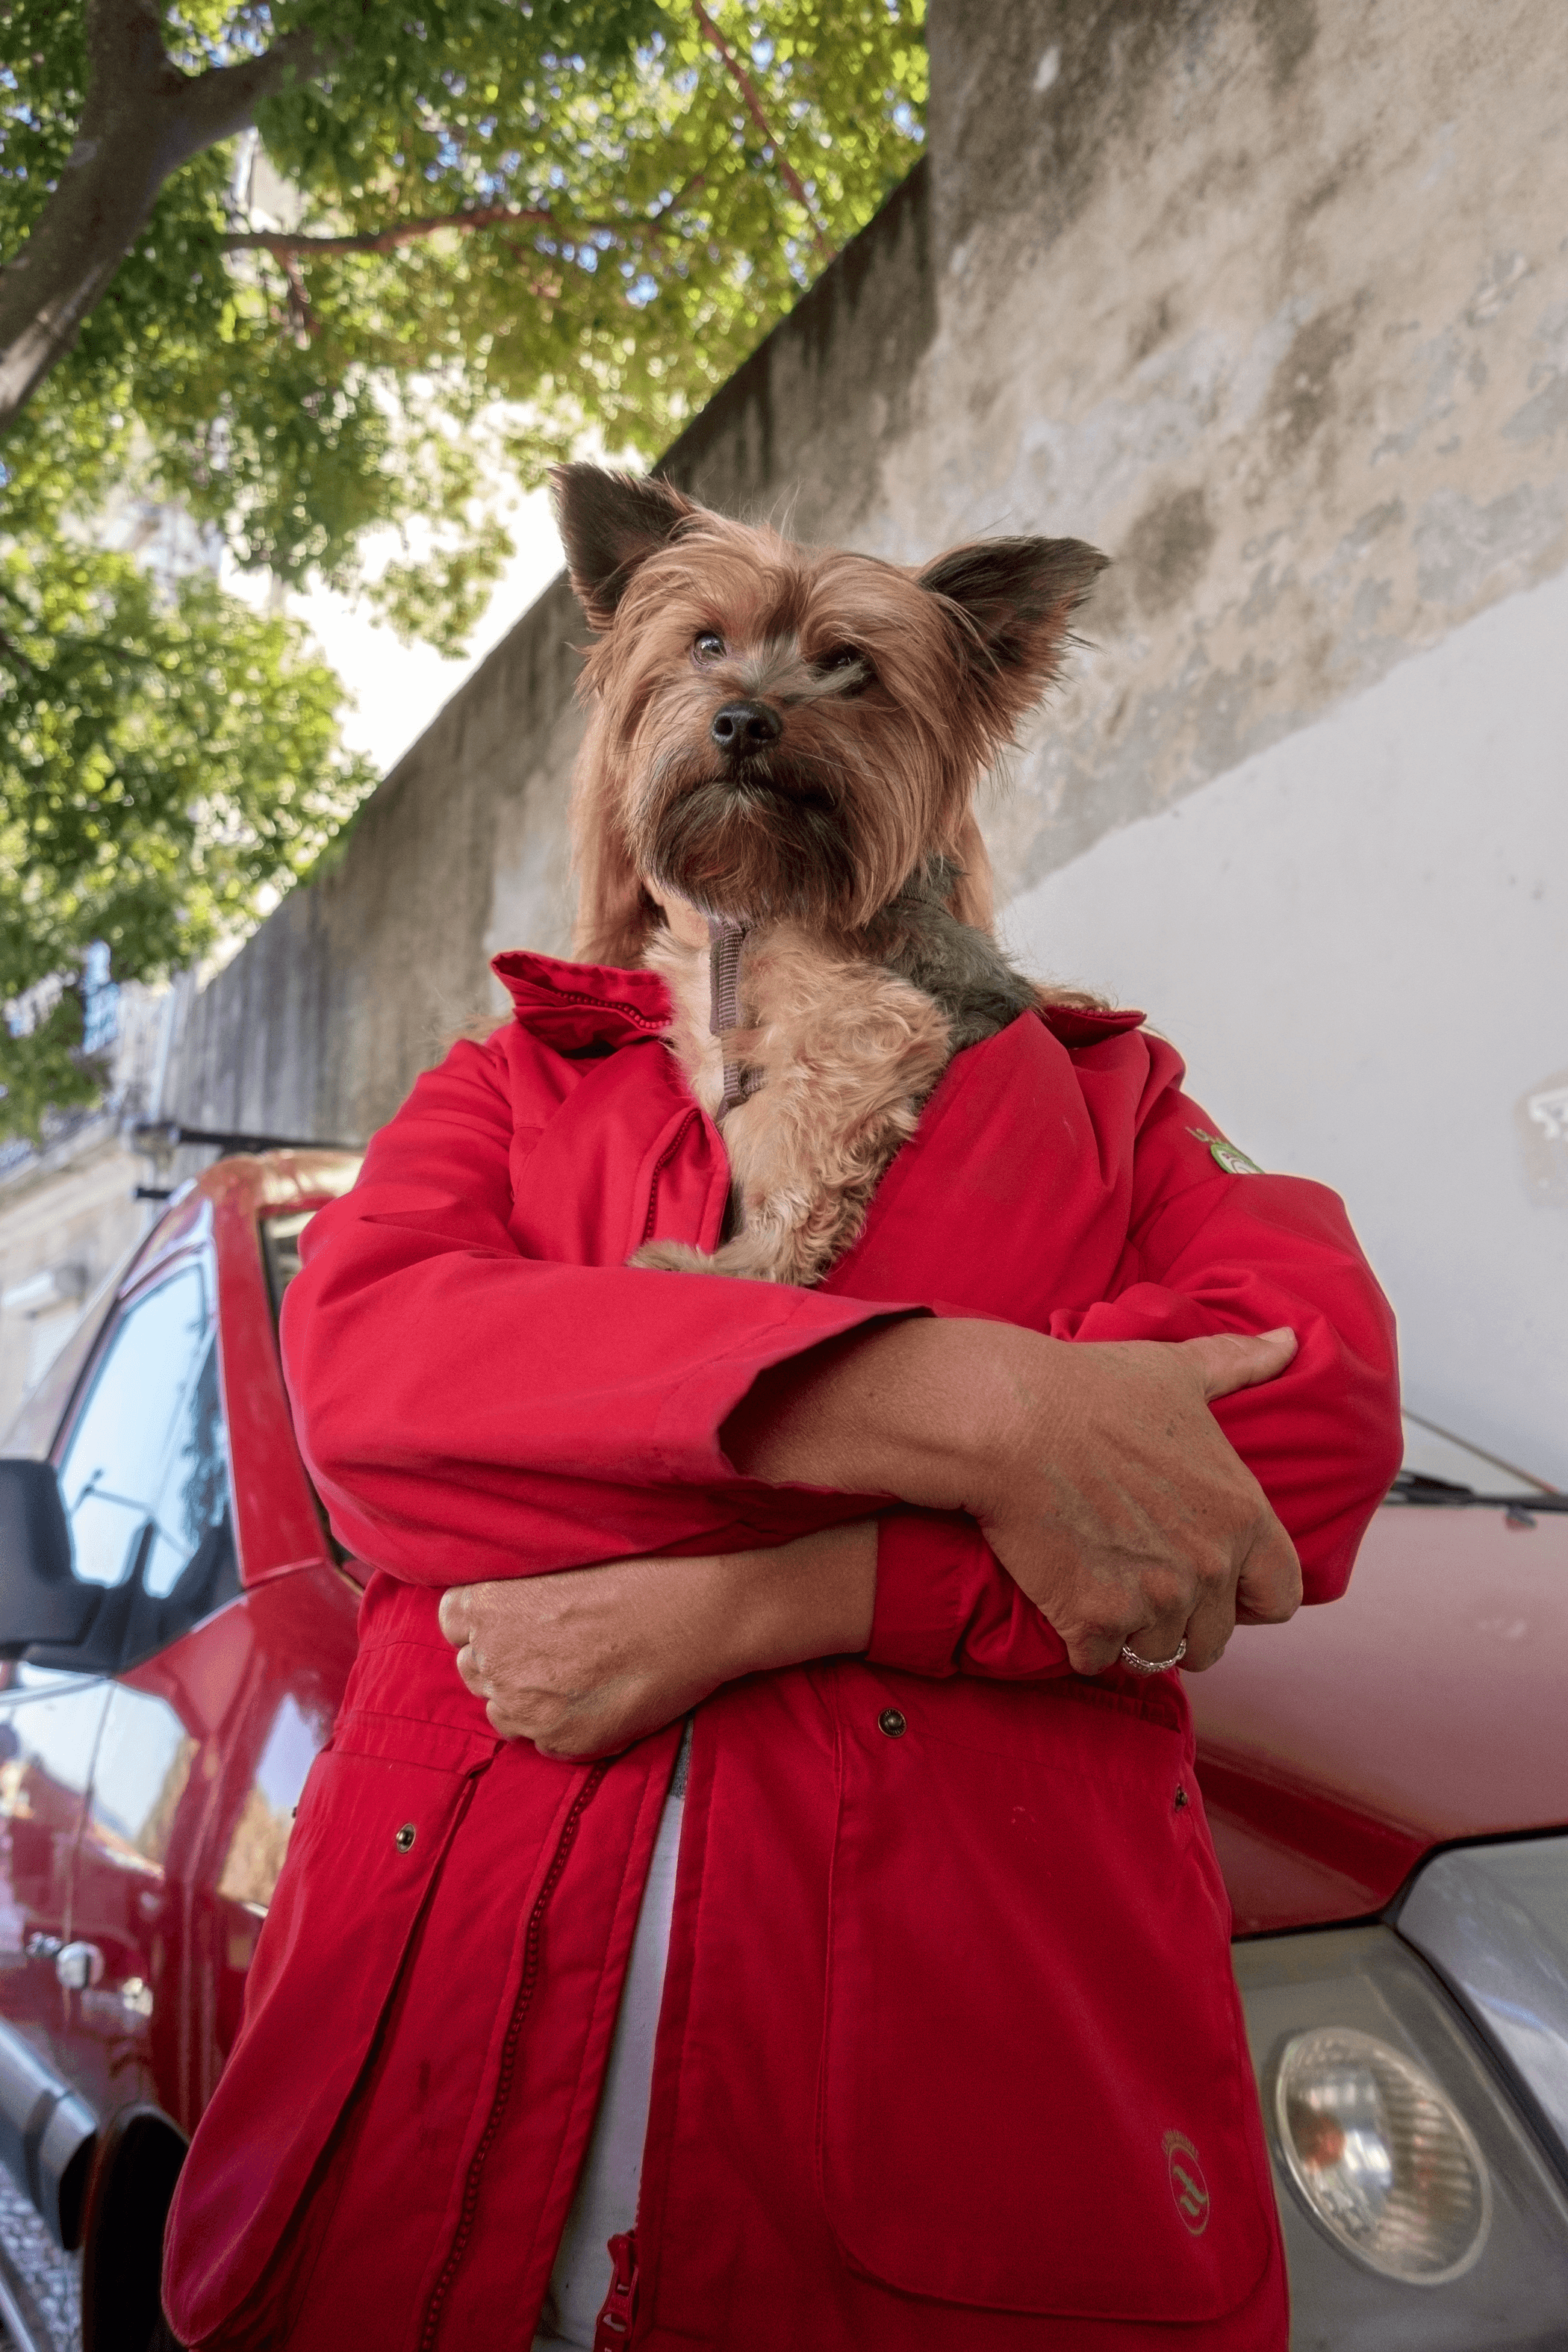 Urban Poetry #8 – Oh my dog! (Edition 1/1)